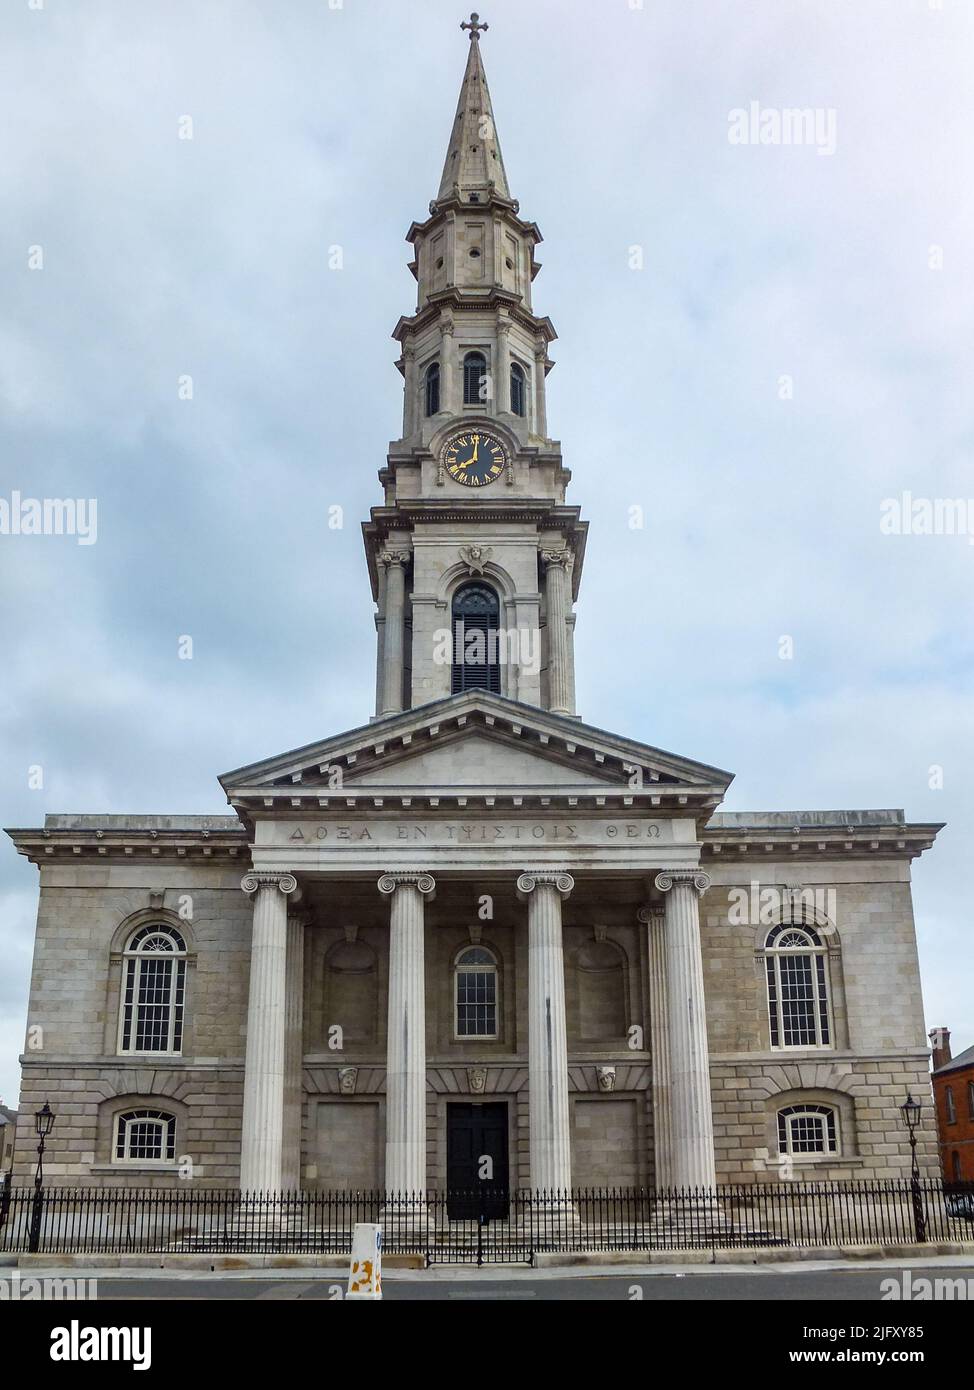 The historic 1814 St. George's Church and its towering steeple in Dublin, Ireland. Stock Photo